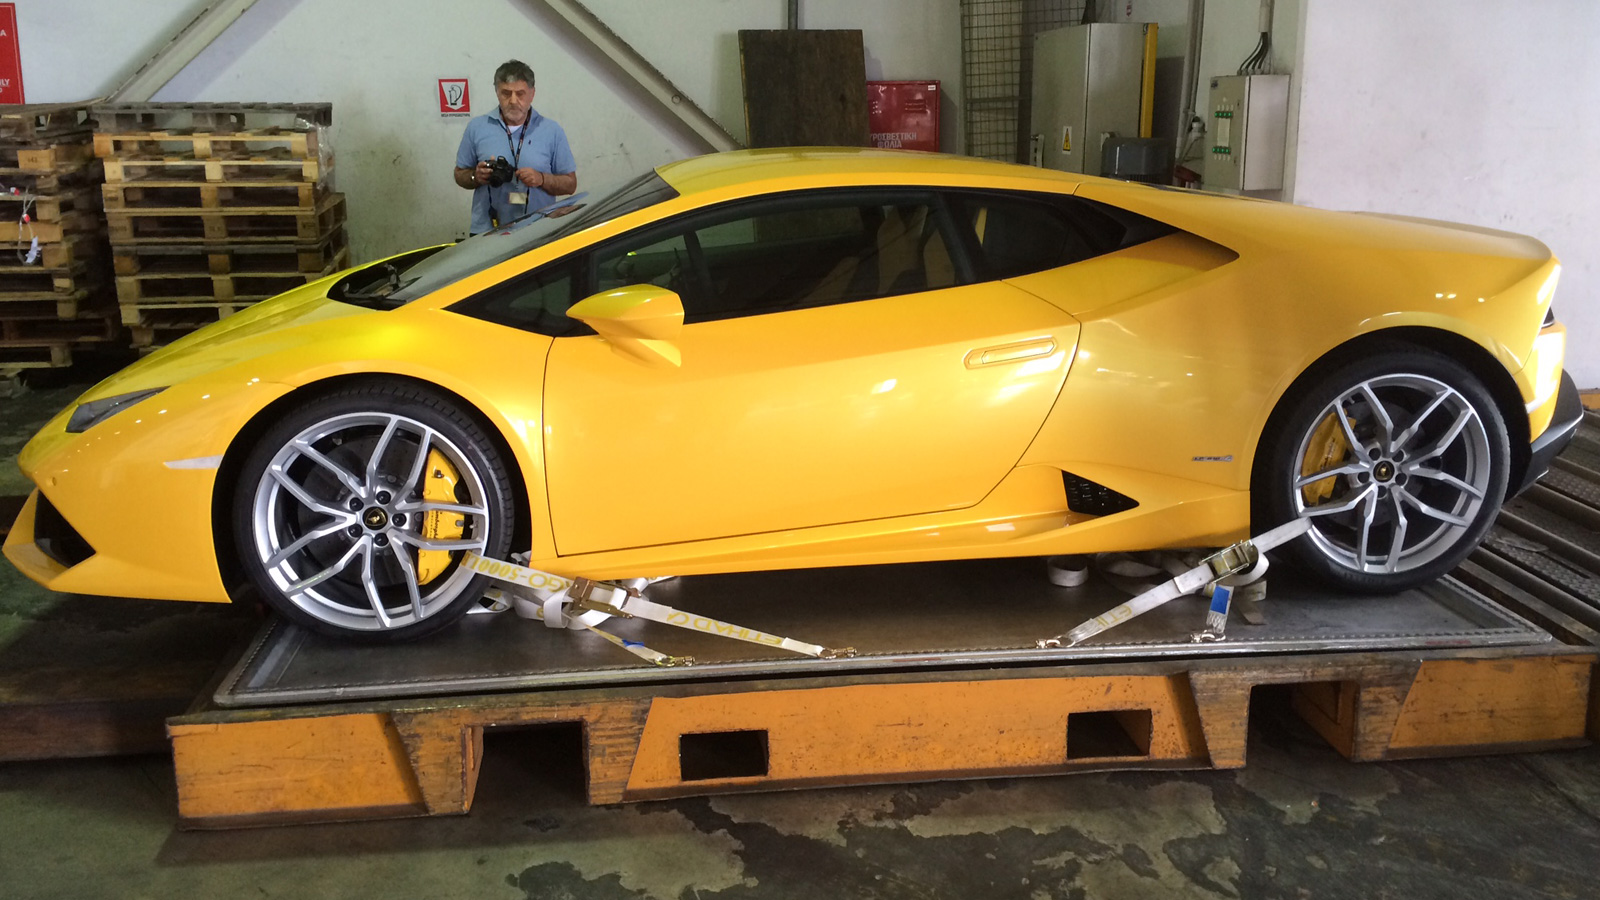 Quix Global Luxury Cars- Supercars Air Freight Transport